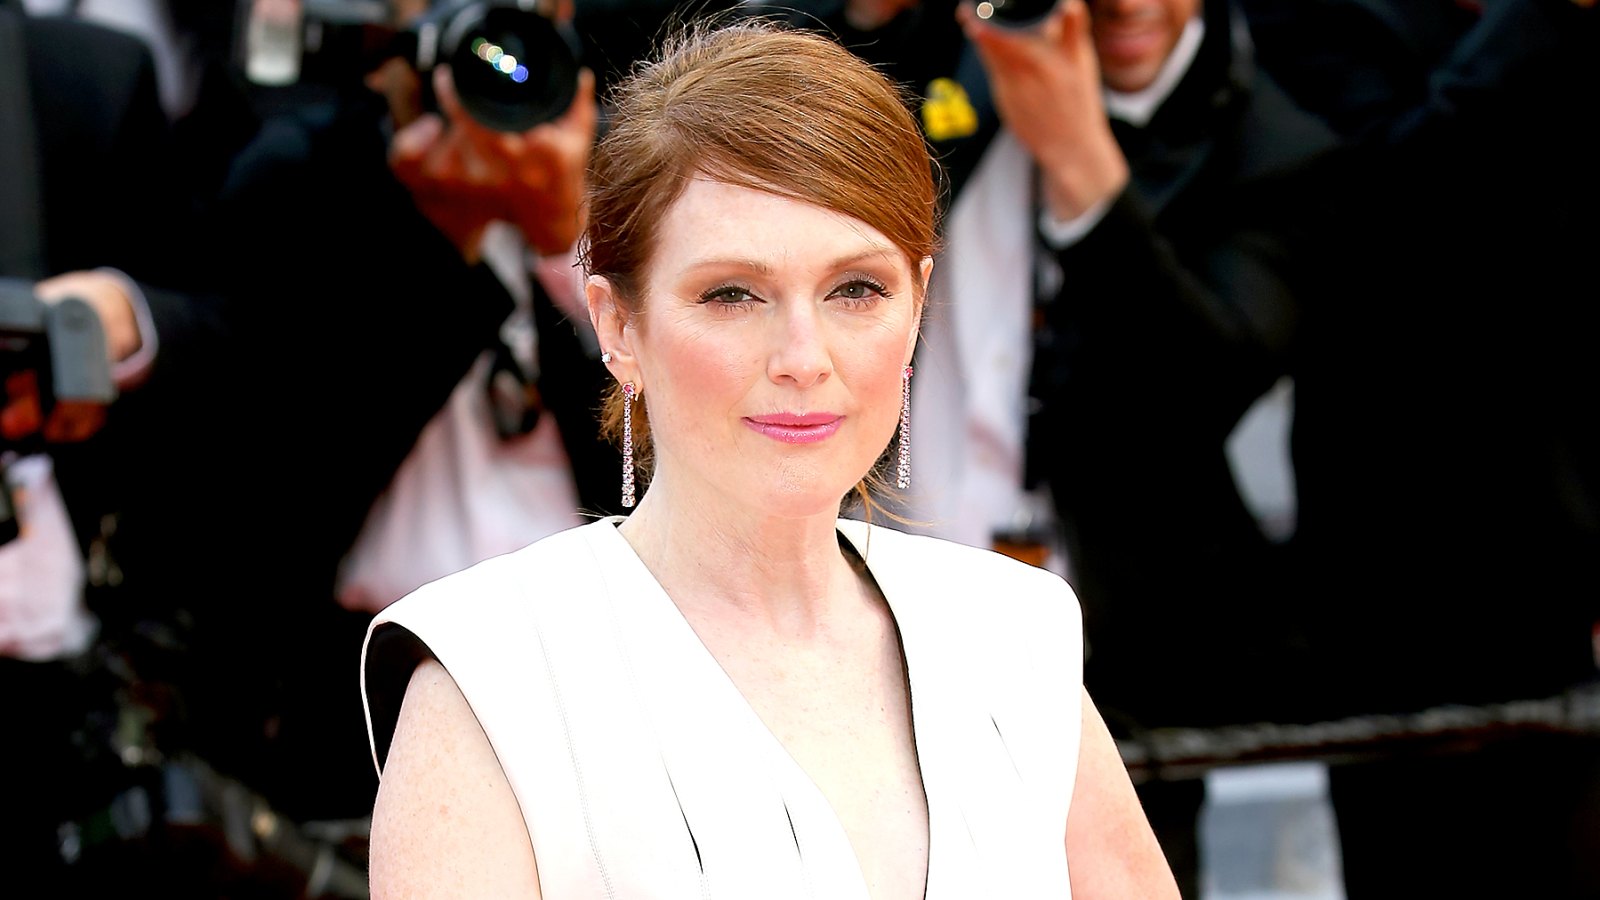 Julianne Moore attends the screening of "Money Monster" at the annual 69th Cannes Film Festival at Palais des Festivals on May 12, 2016 in Cannes, France.